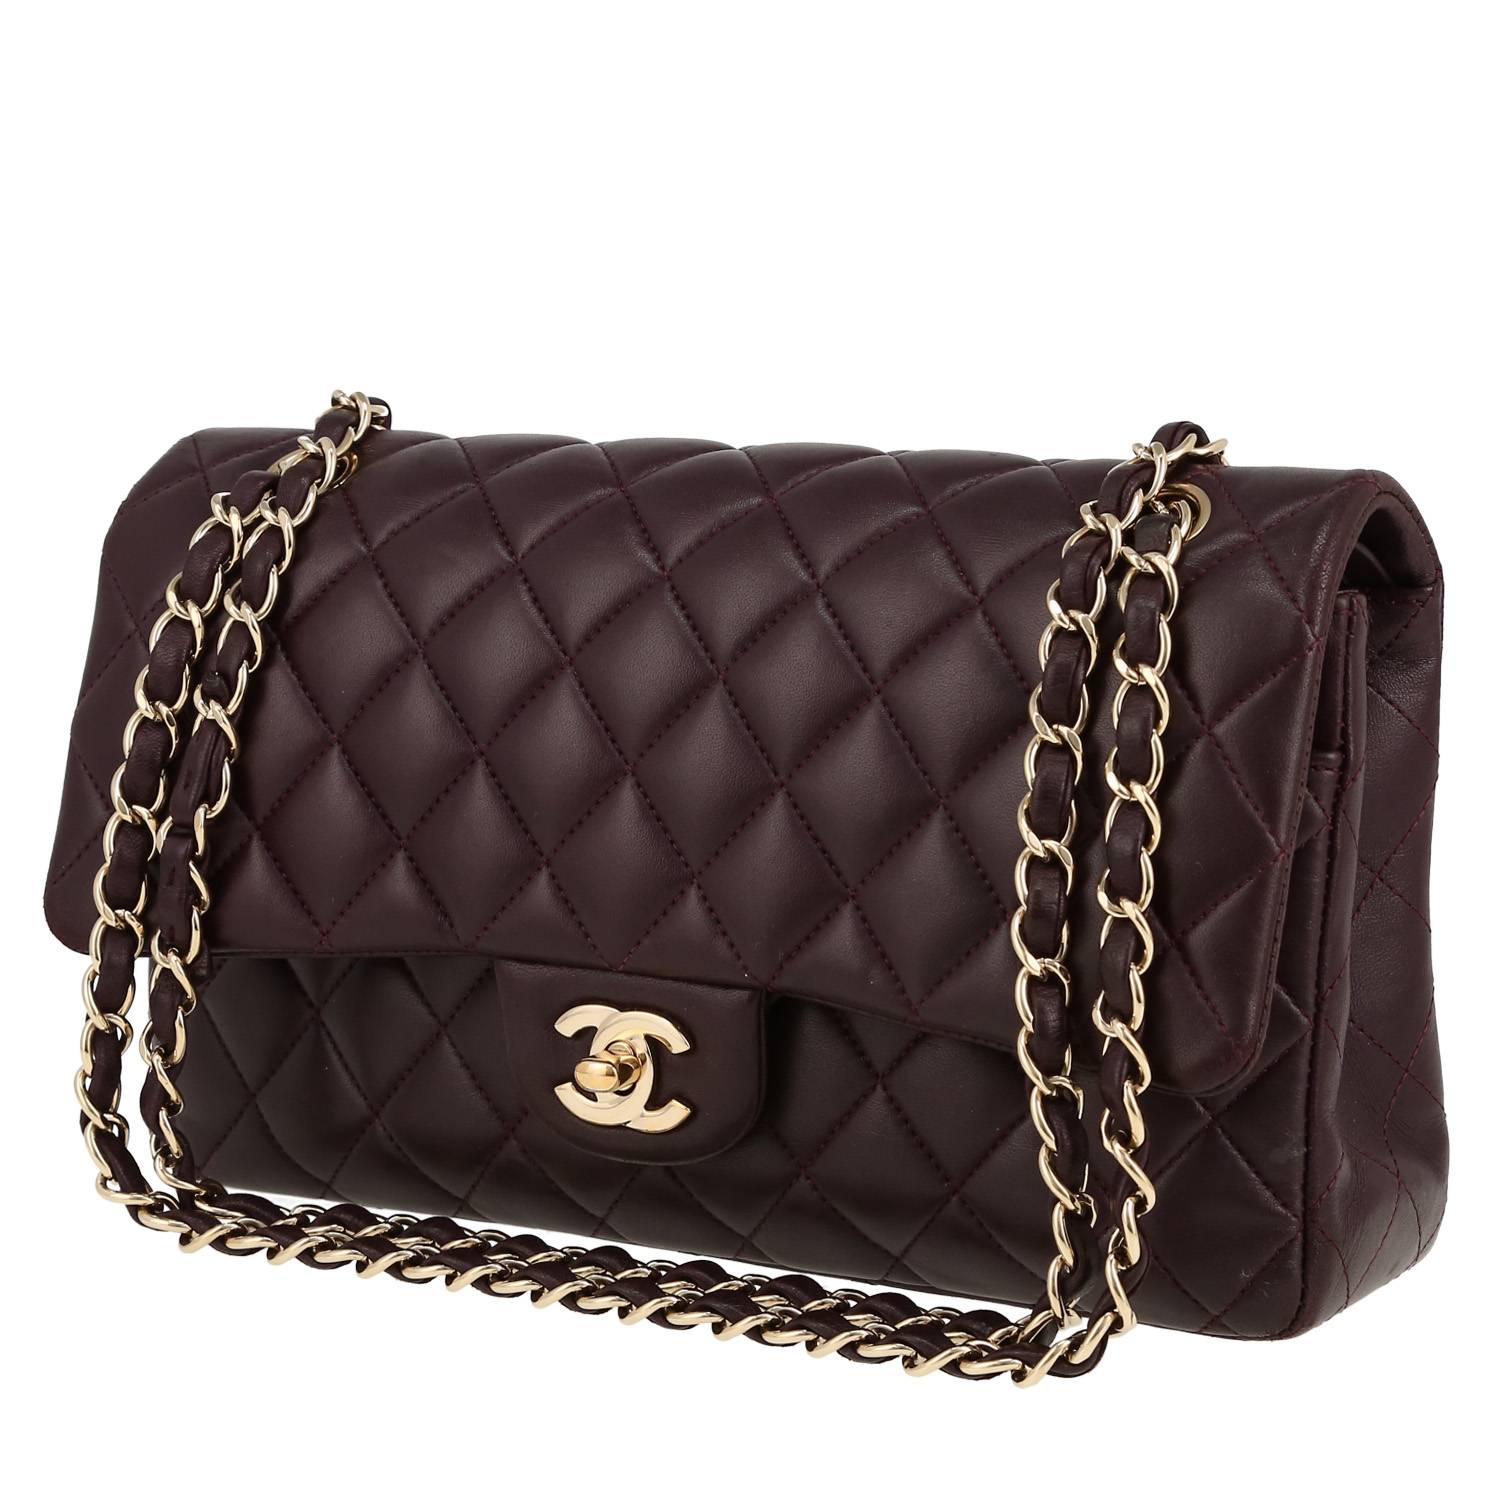 Timeless Classic Handbag In Plum Quilted Leather